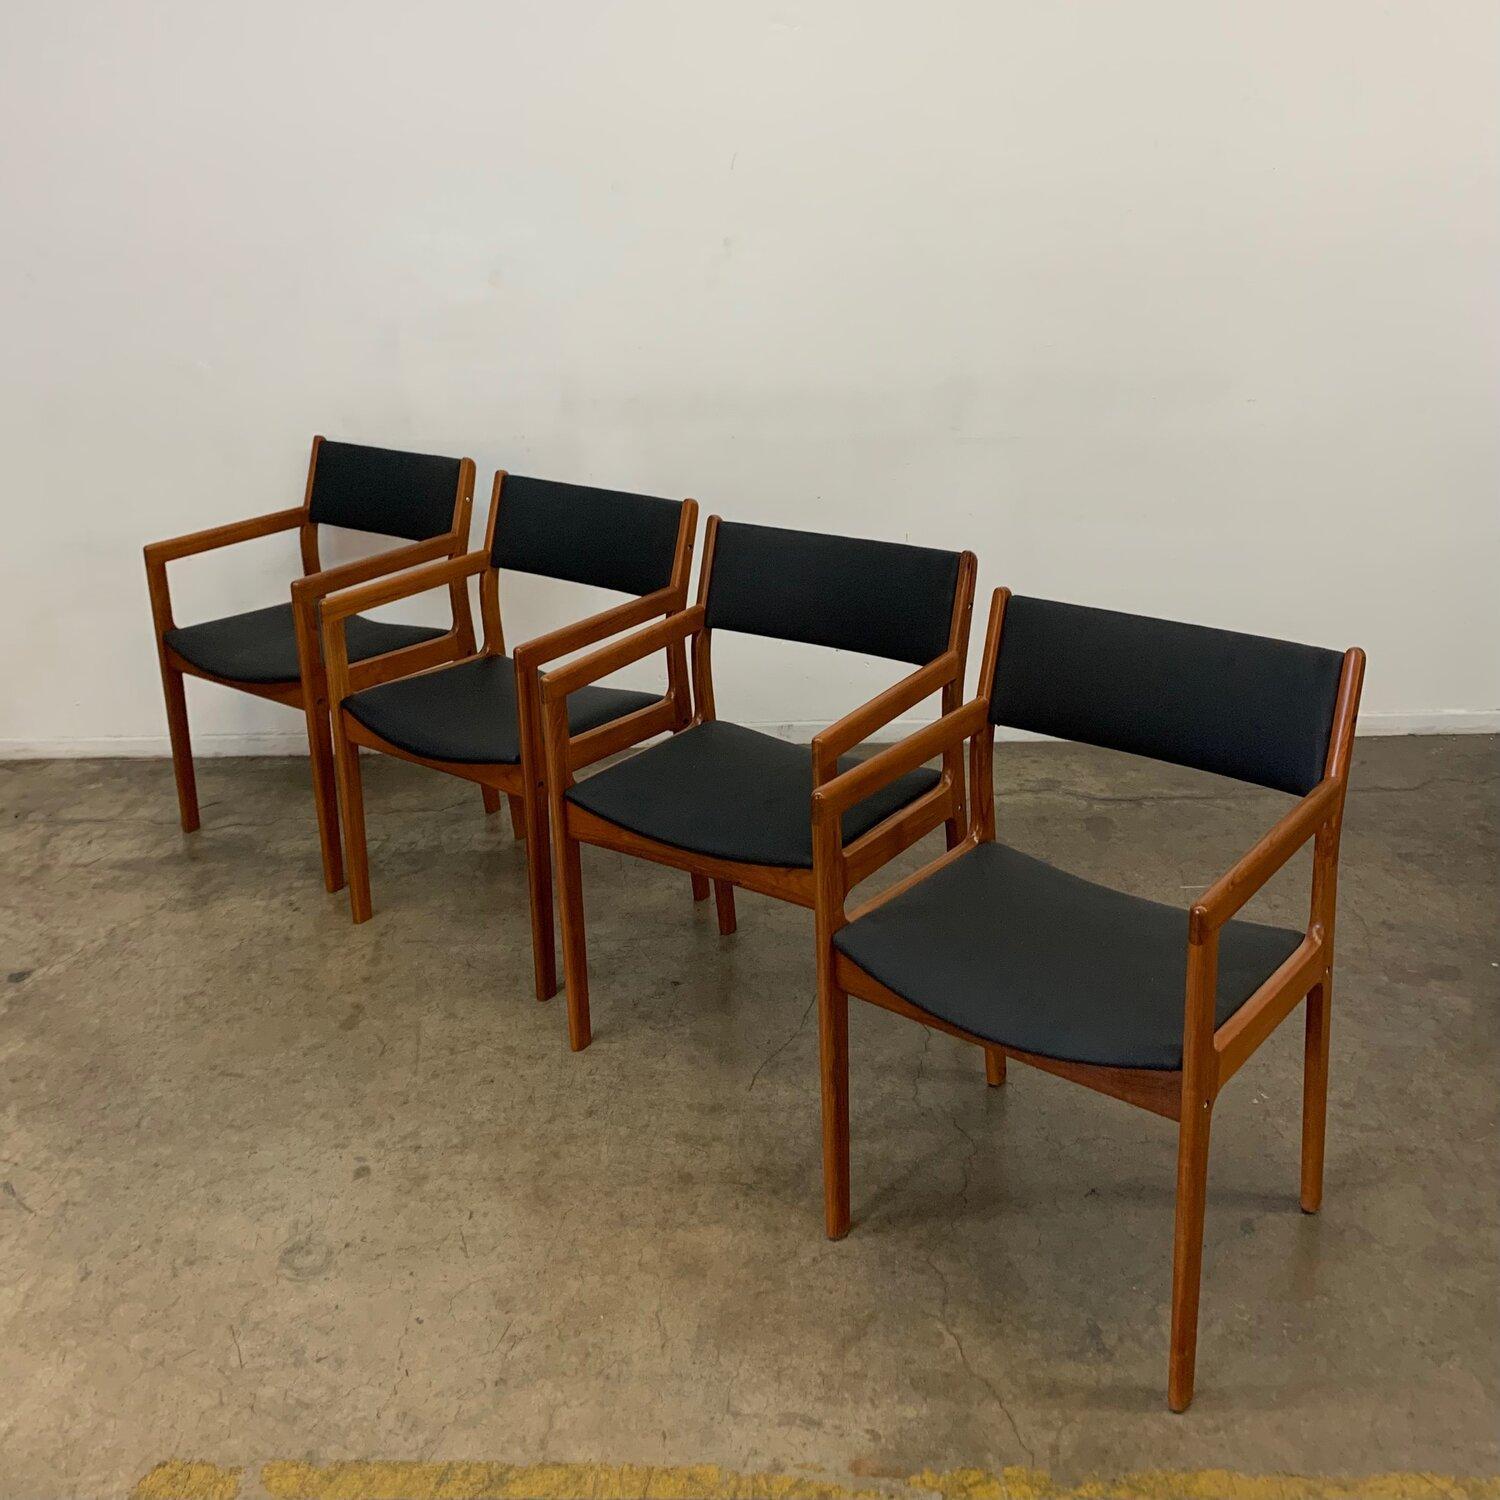 W21, D21, H31, SW18, SD17, SH18, arm H25.5 from floor to top of arm.

Fully restored Danish modern dining chairs in teak and thick black soft vinyl. Chairs are structurally sound and sturdy. Price is for the set of four. 



